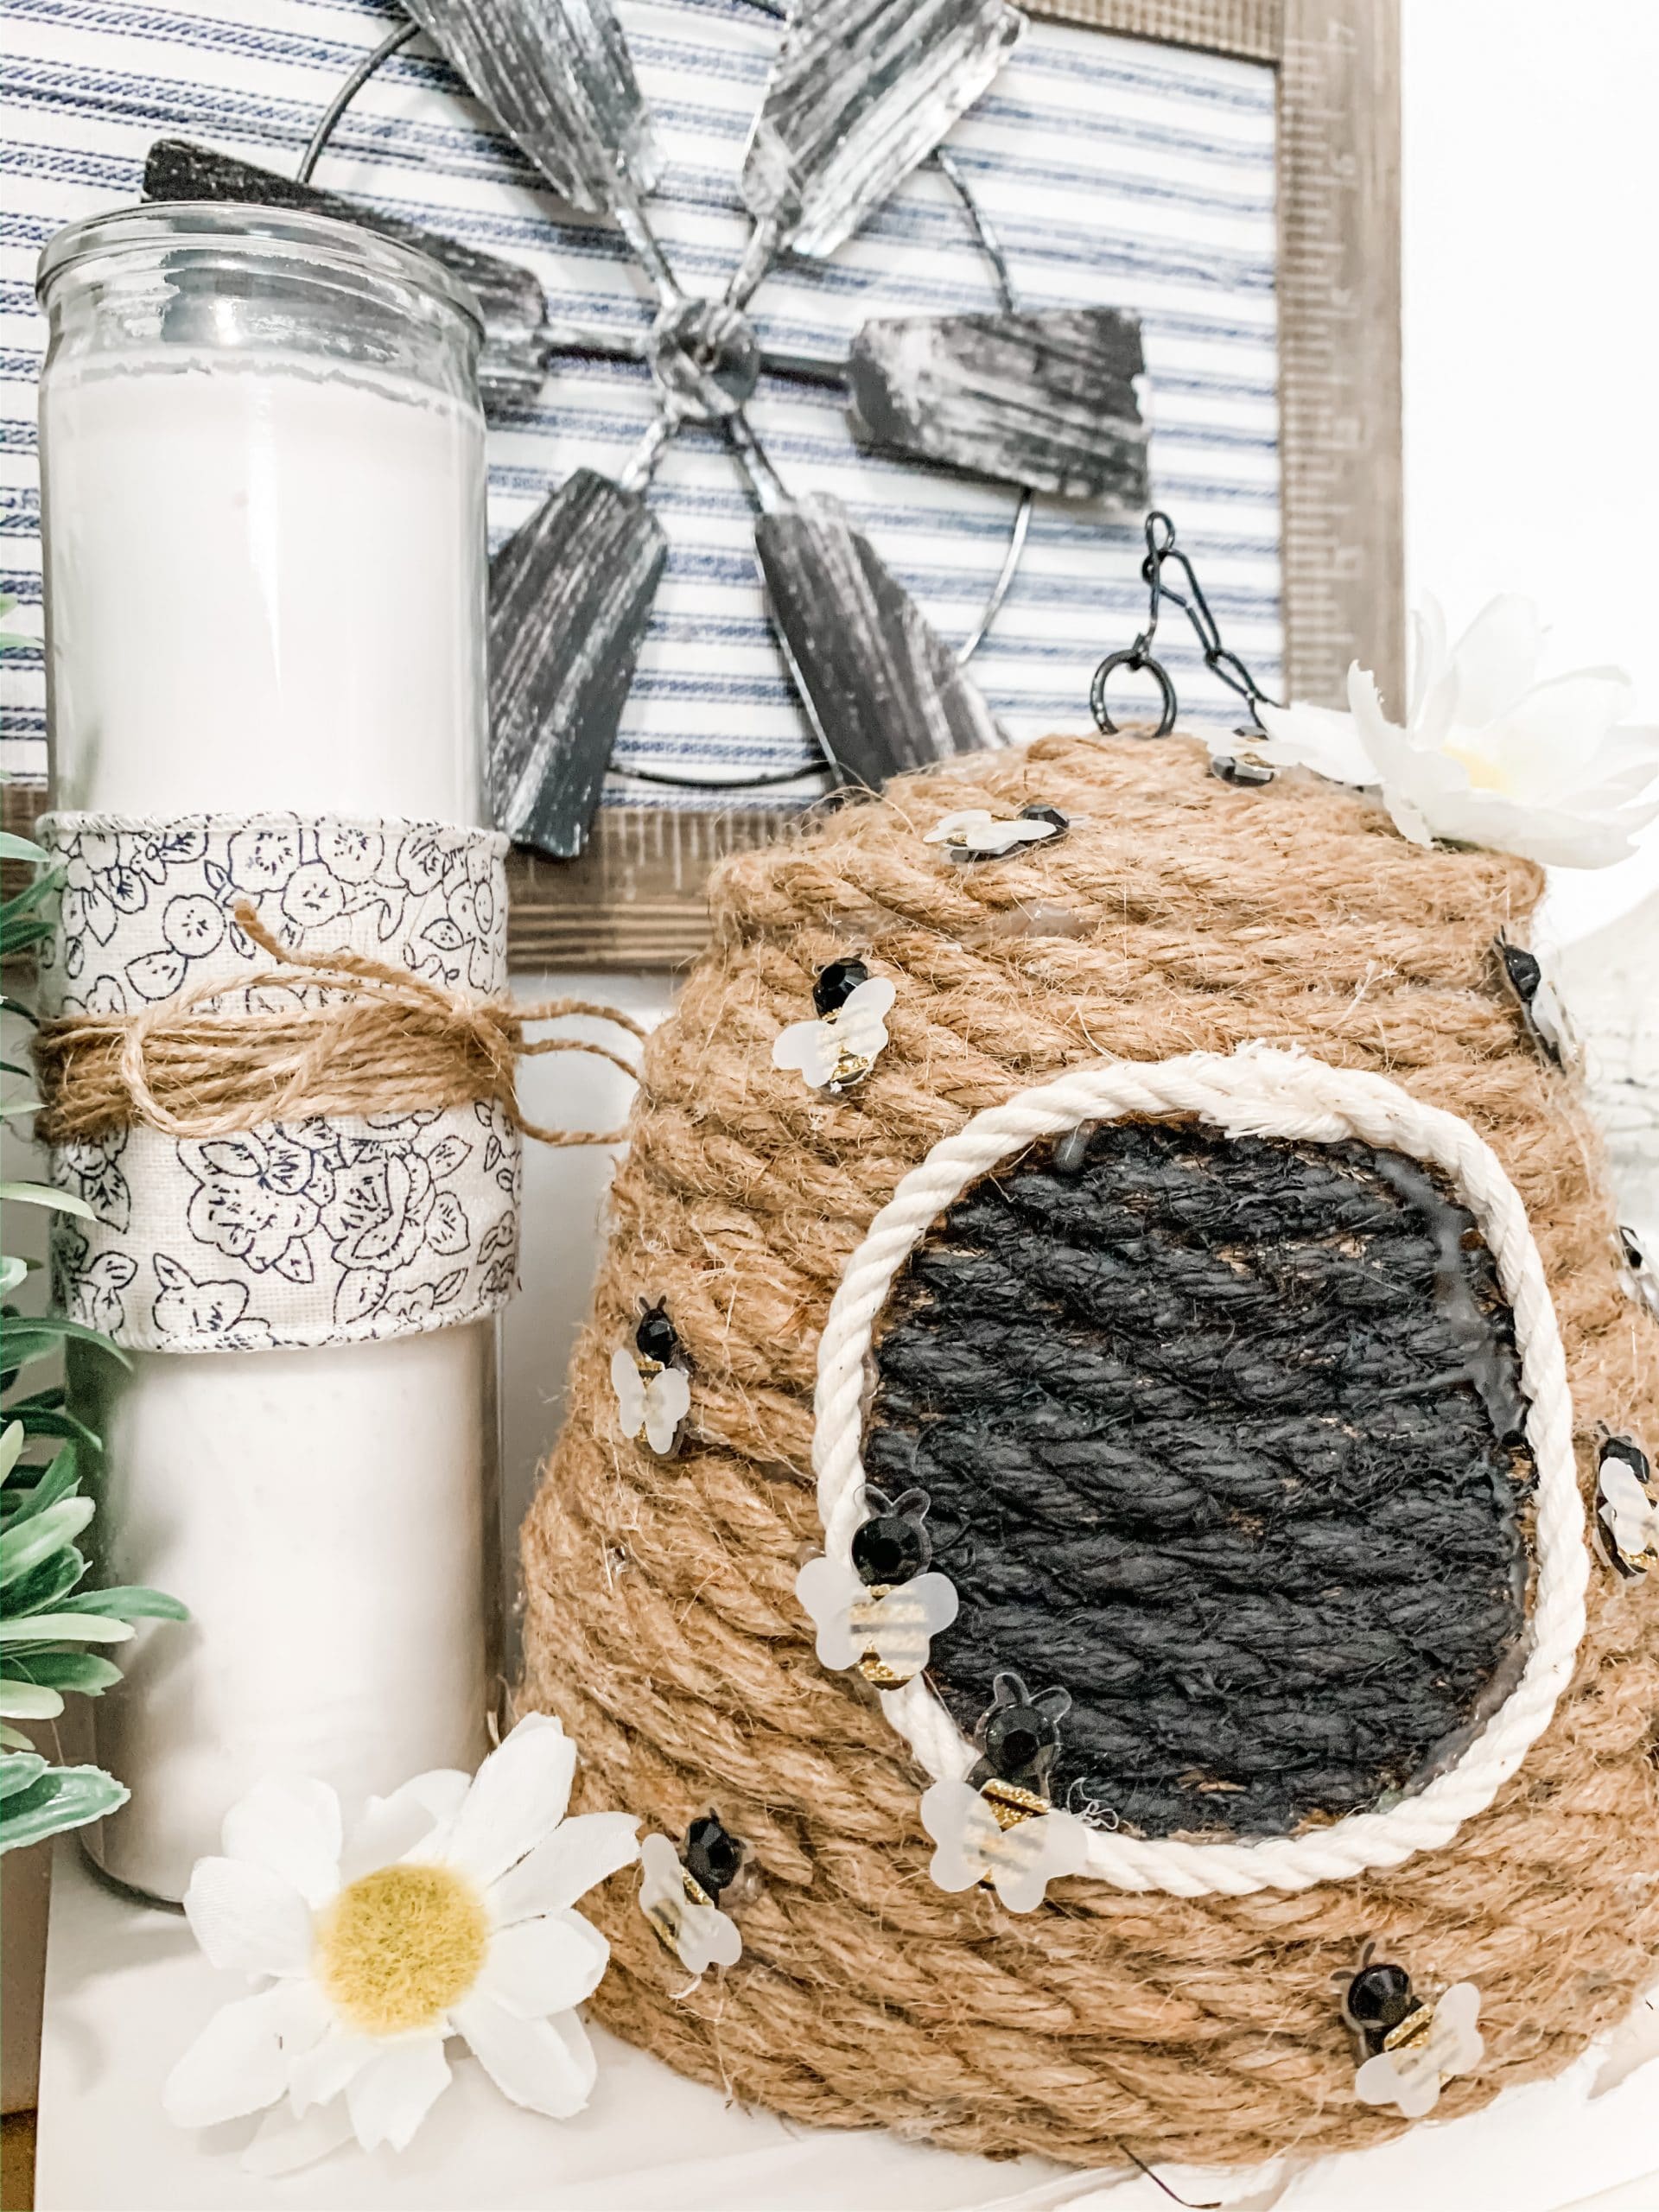 So simple it's ridiculous!' The DIY rope beehive for your 24th